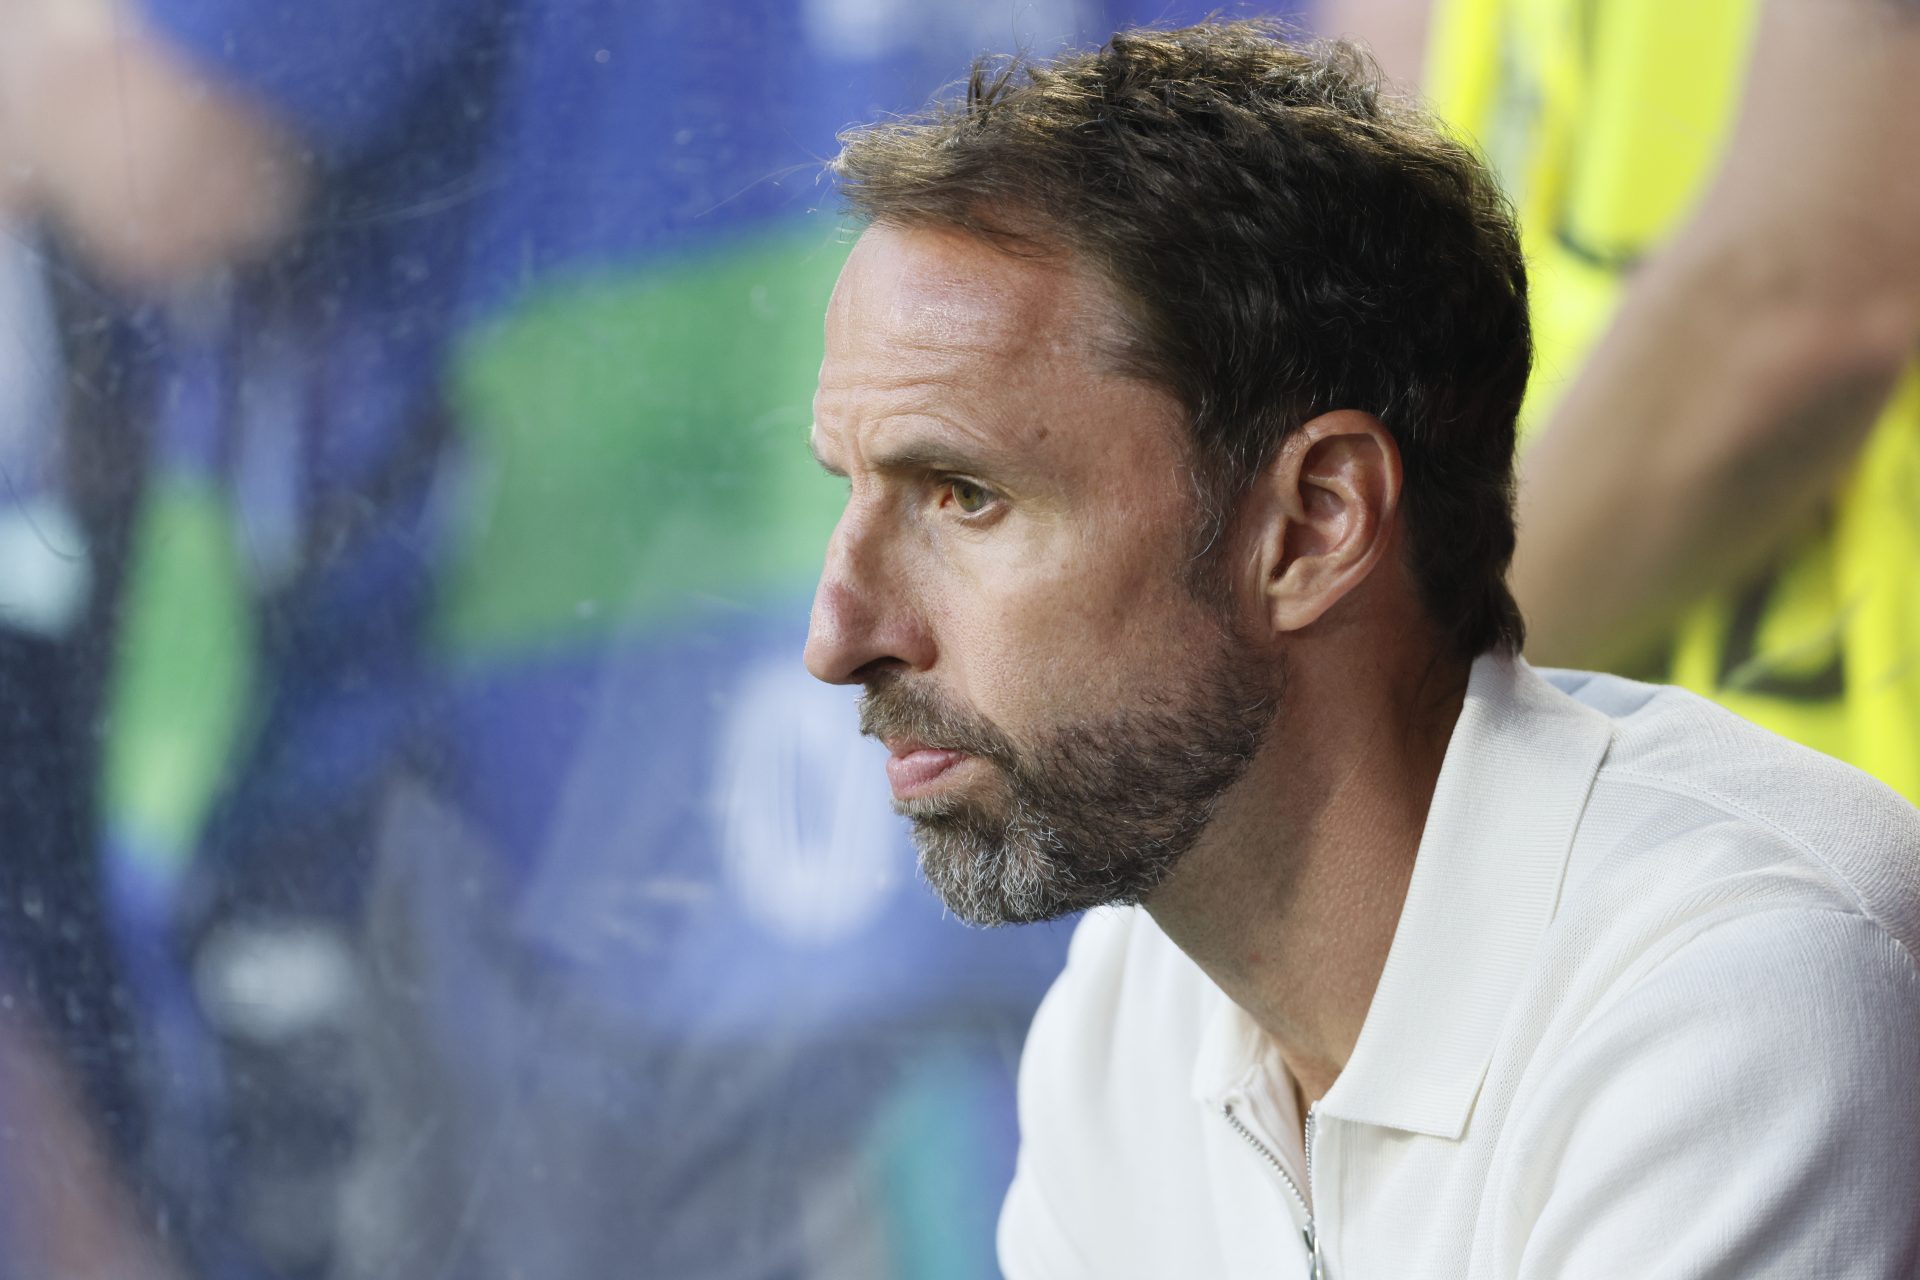 England's fans shameful action against Southgate following Slovenia draw